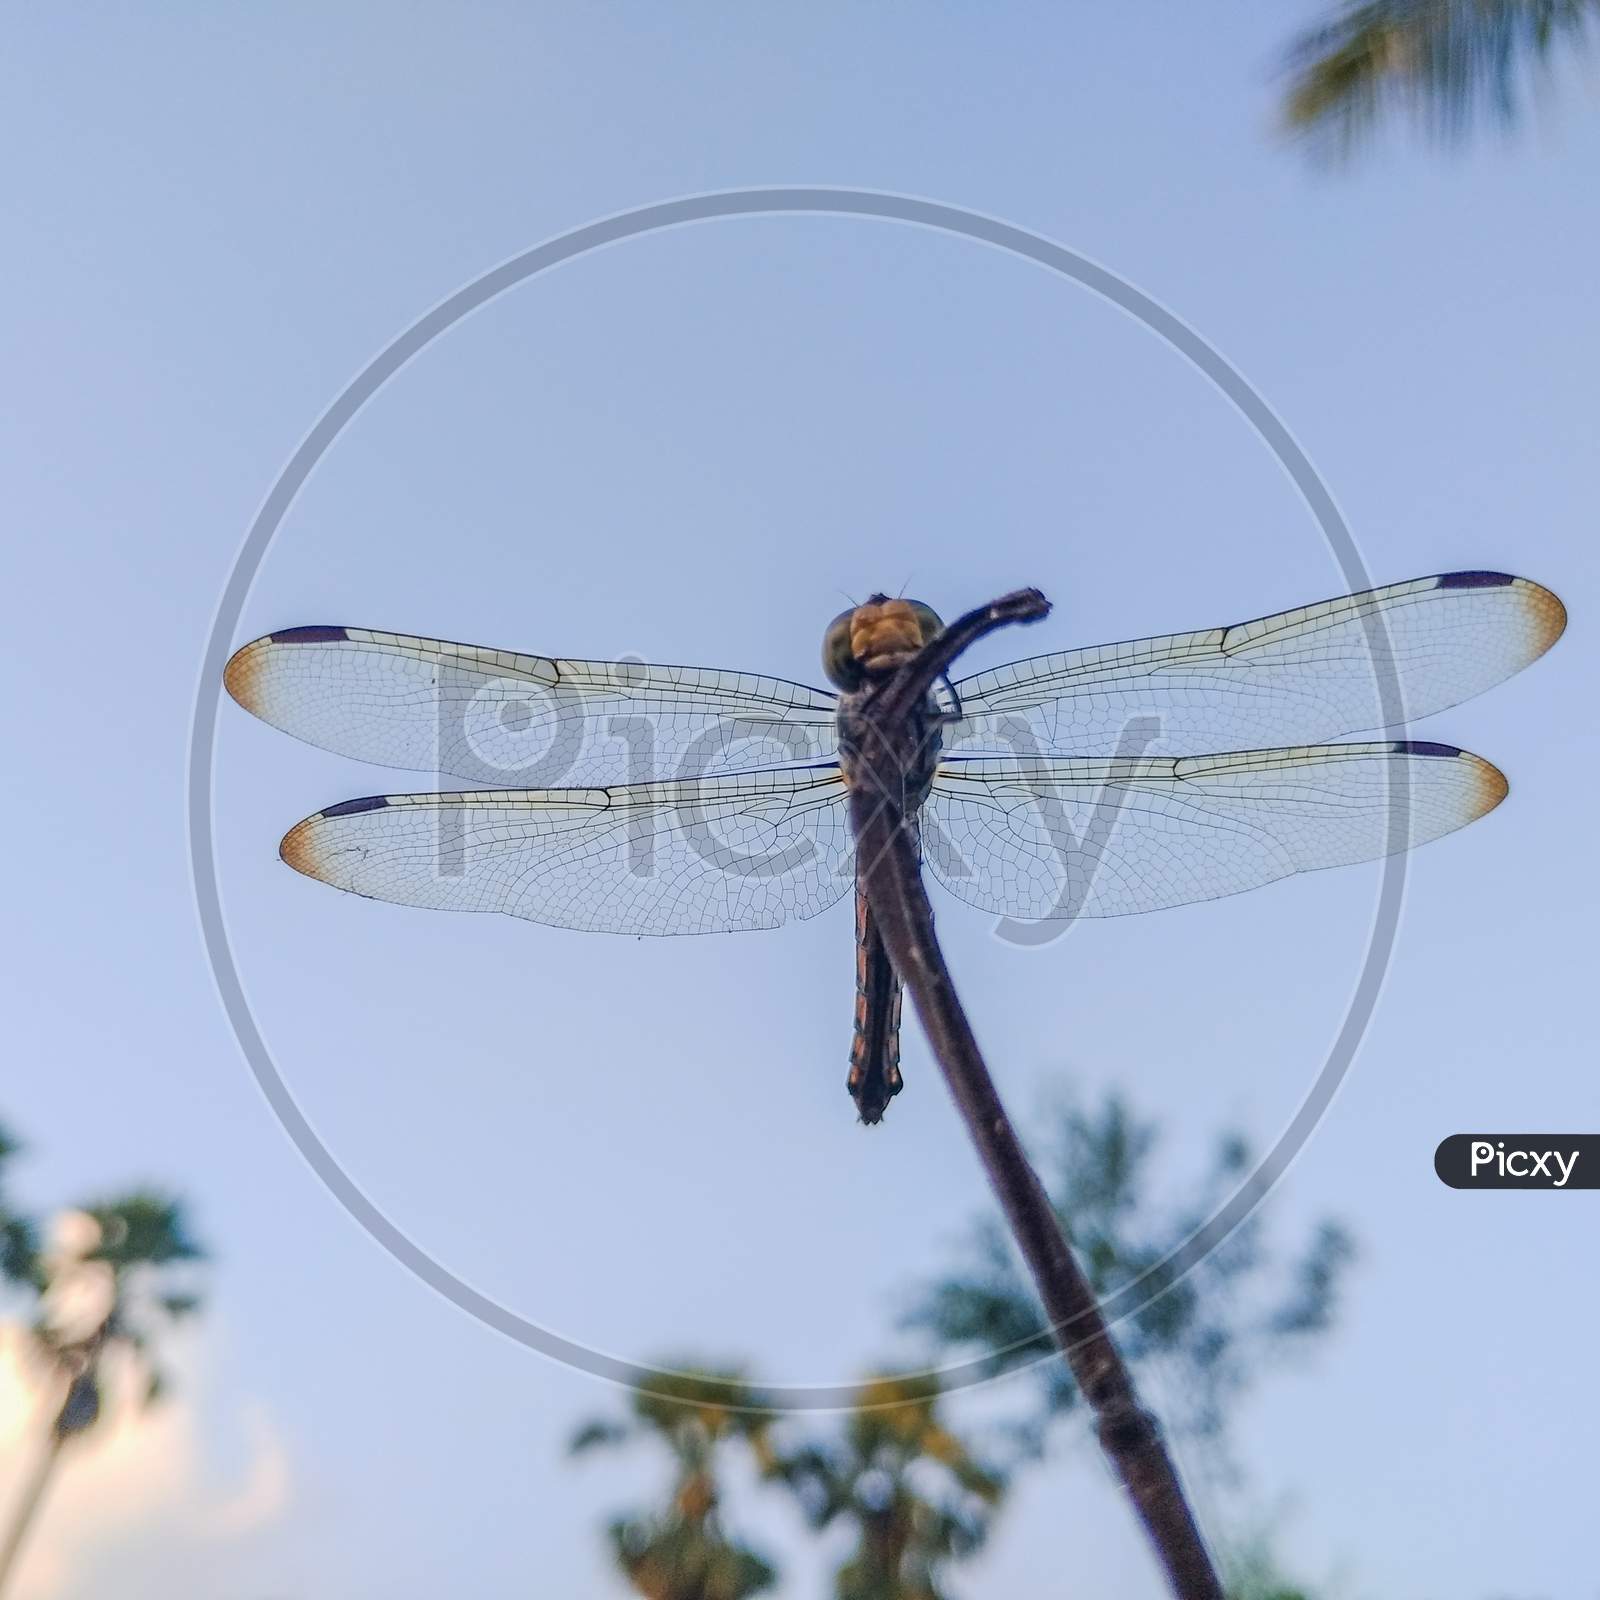 This is a Dragonfly insect